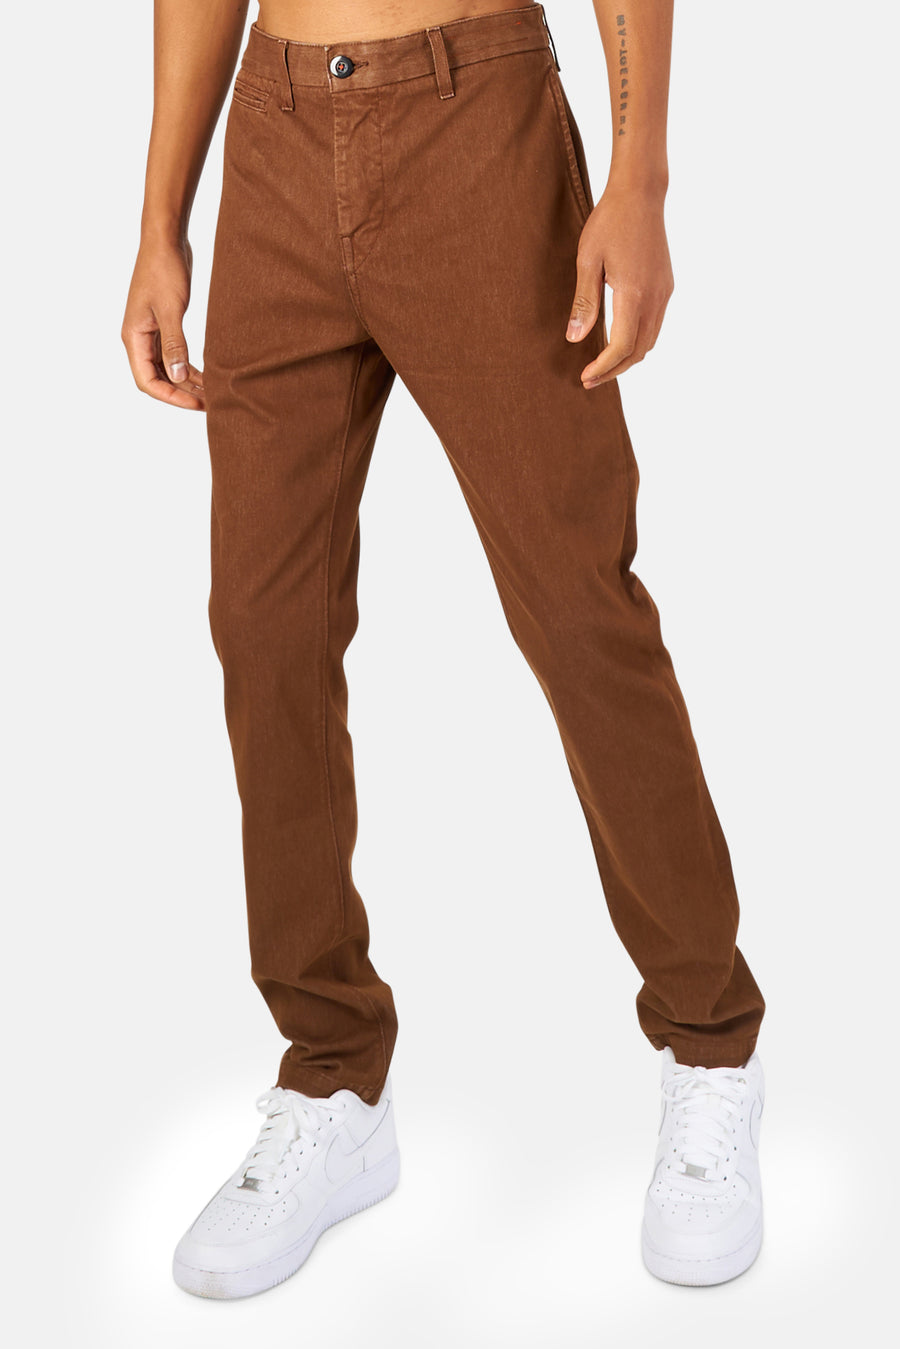 The Axe Denit Chino Pant Brown - blueandcream